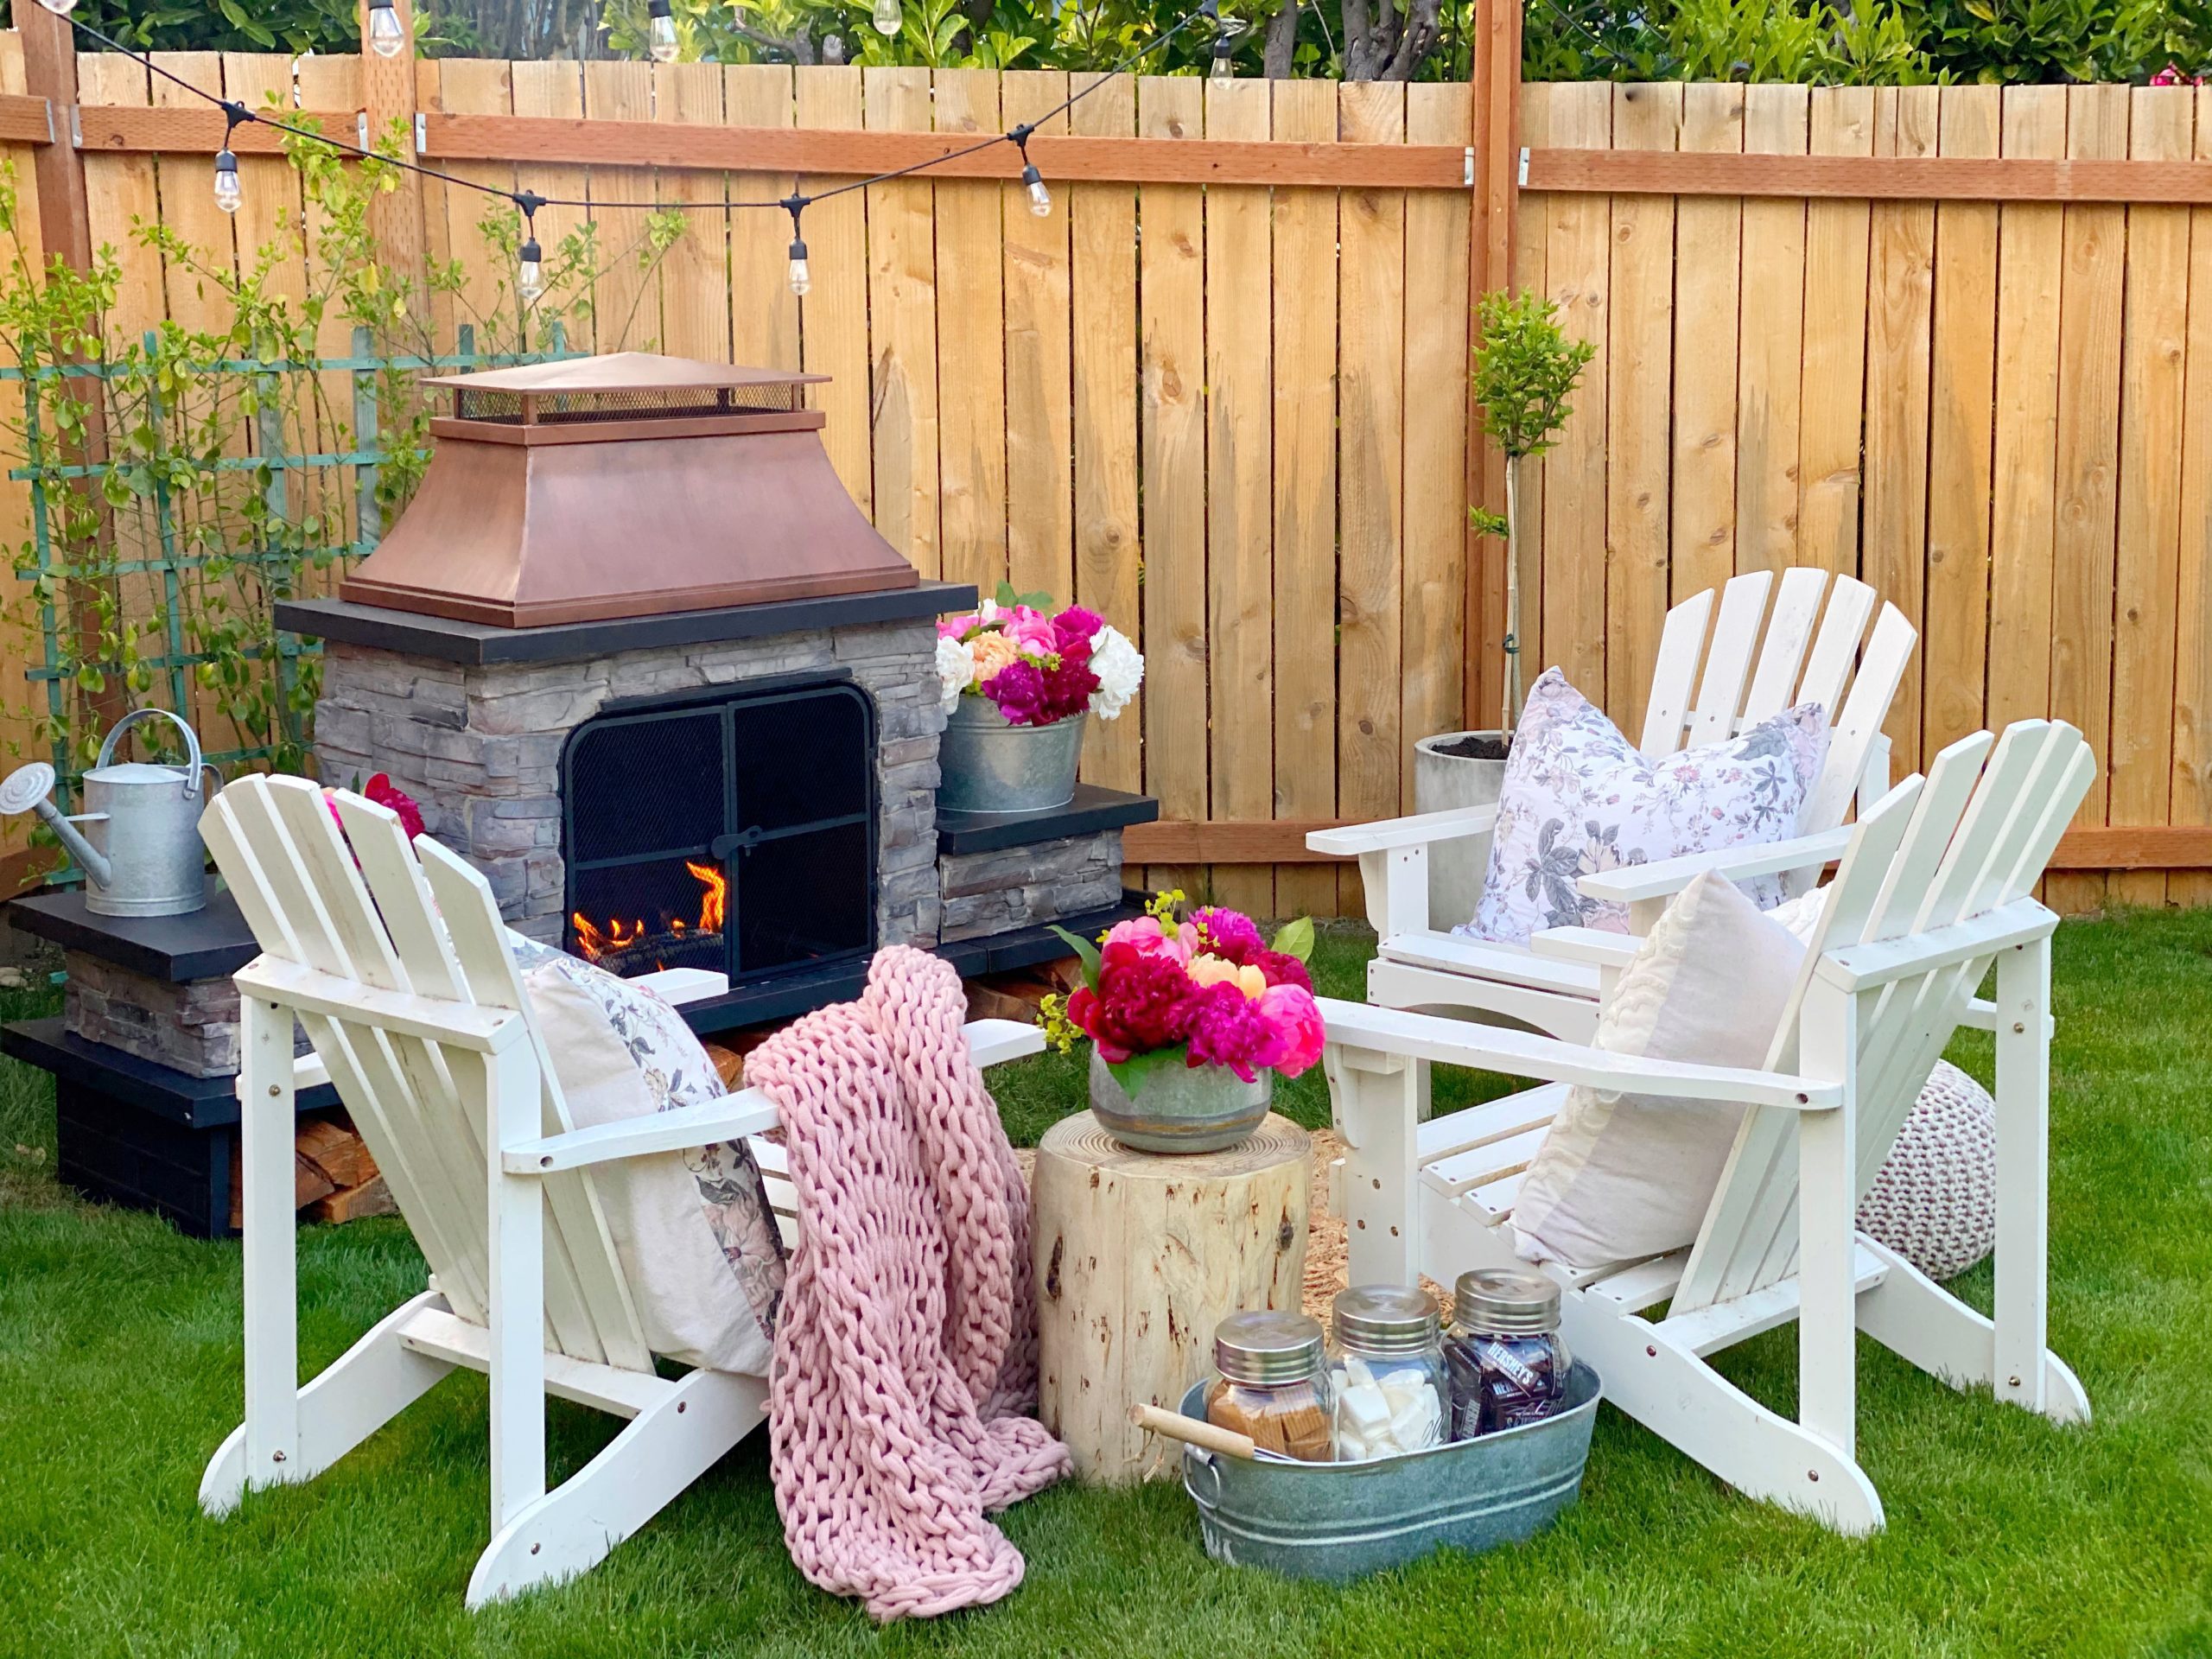 Outdoor Fireplace – S’more Time!